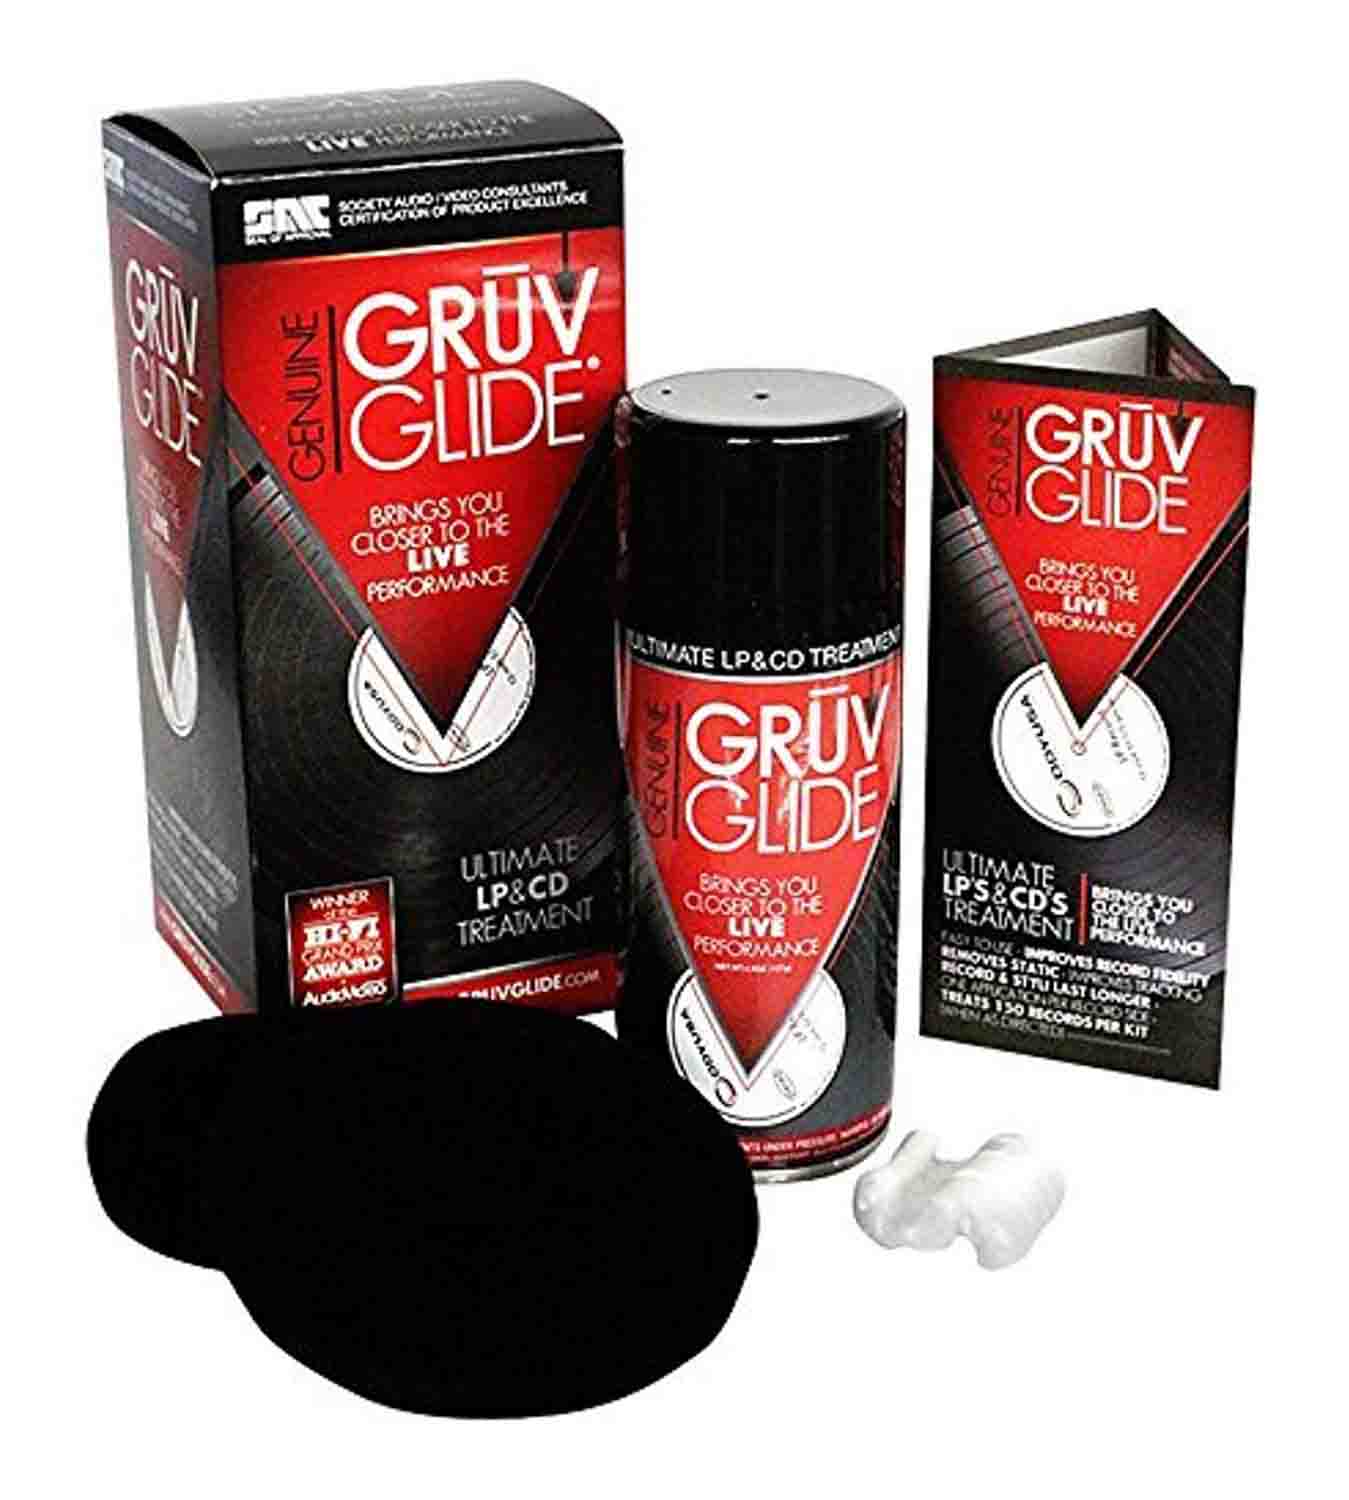 Odyssey GruvGlide LP Vinyl Record Cleaning Treatment Kit GruvGlide